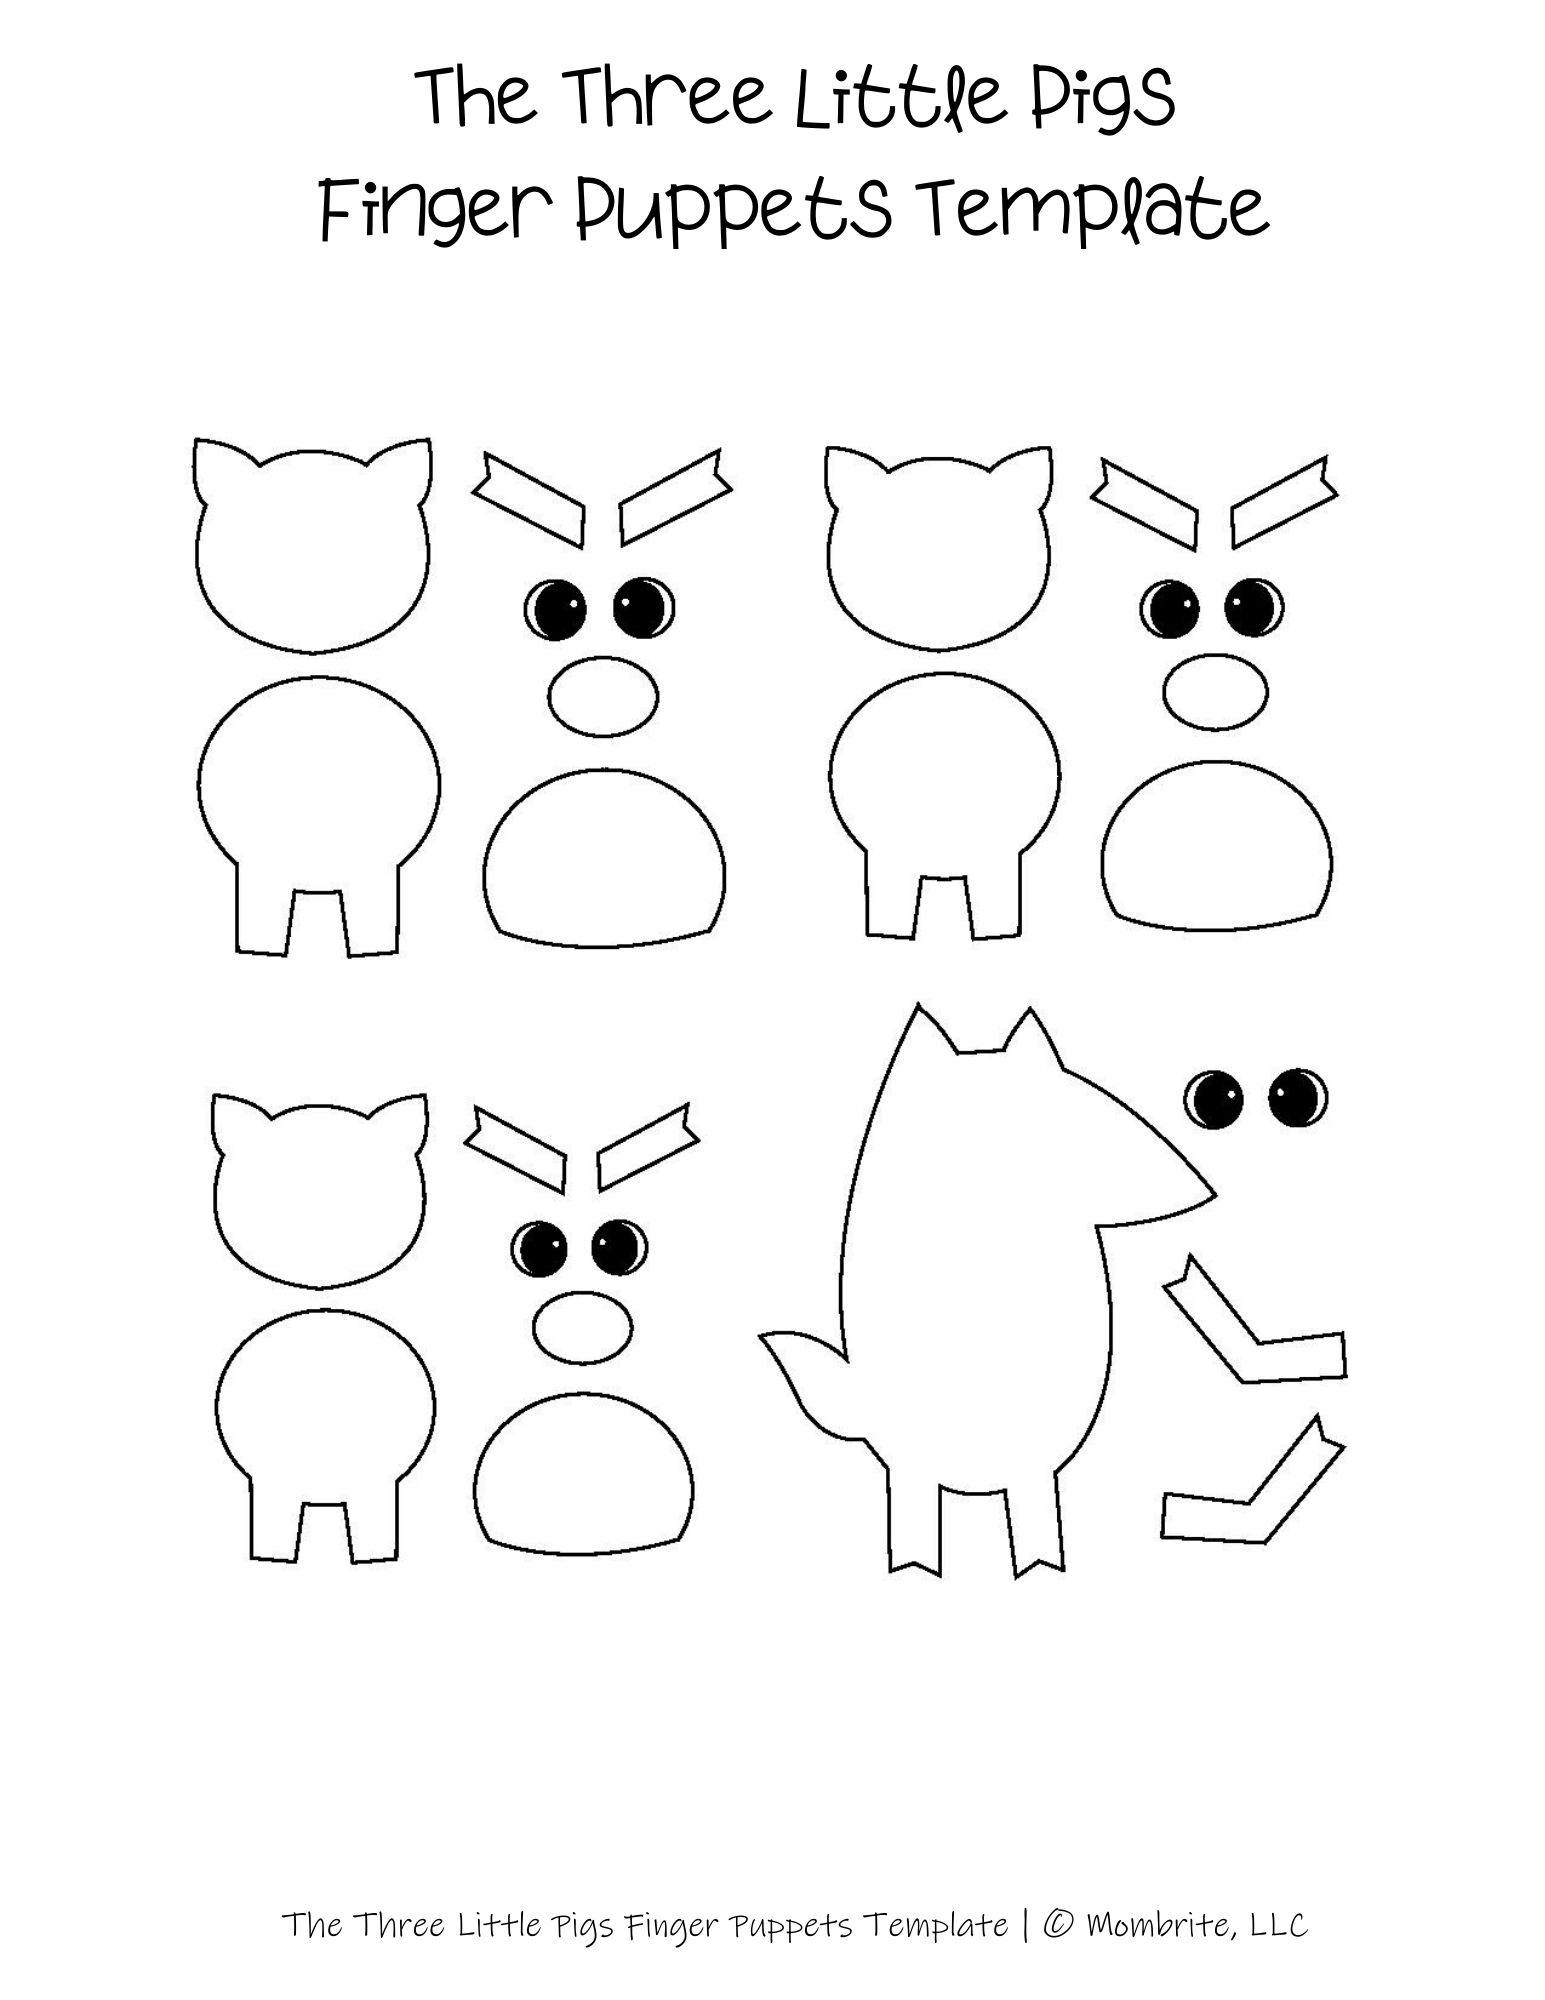 free-the-three-little-pigs-finger-puppets-template